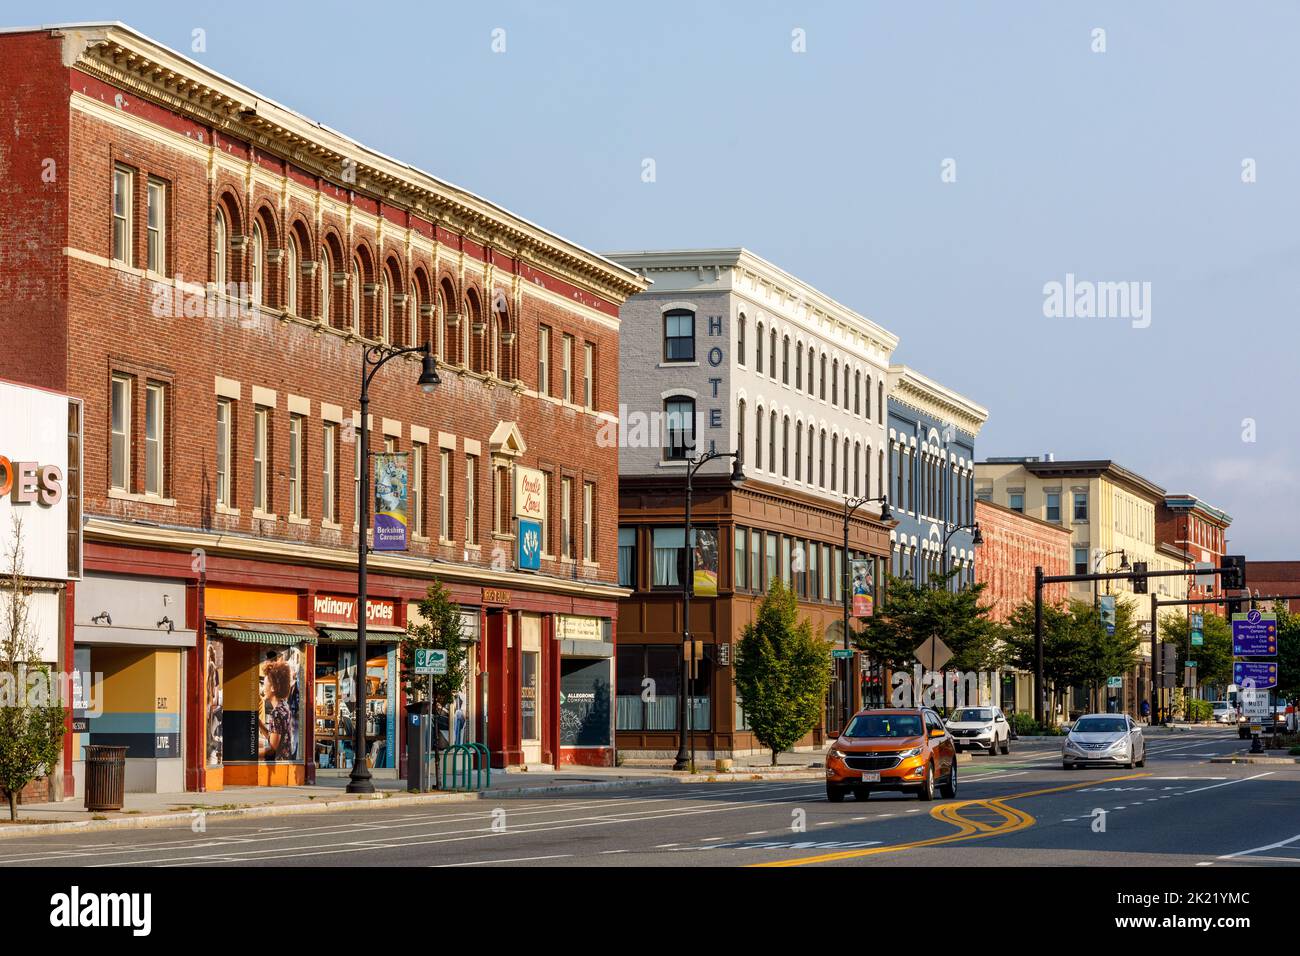 The city of Pittsfield, Massachusetts, largest city in the Berkshires, USA Stock Photo